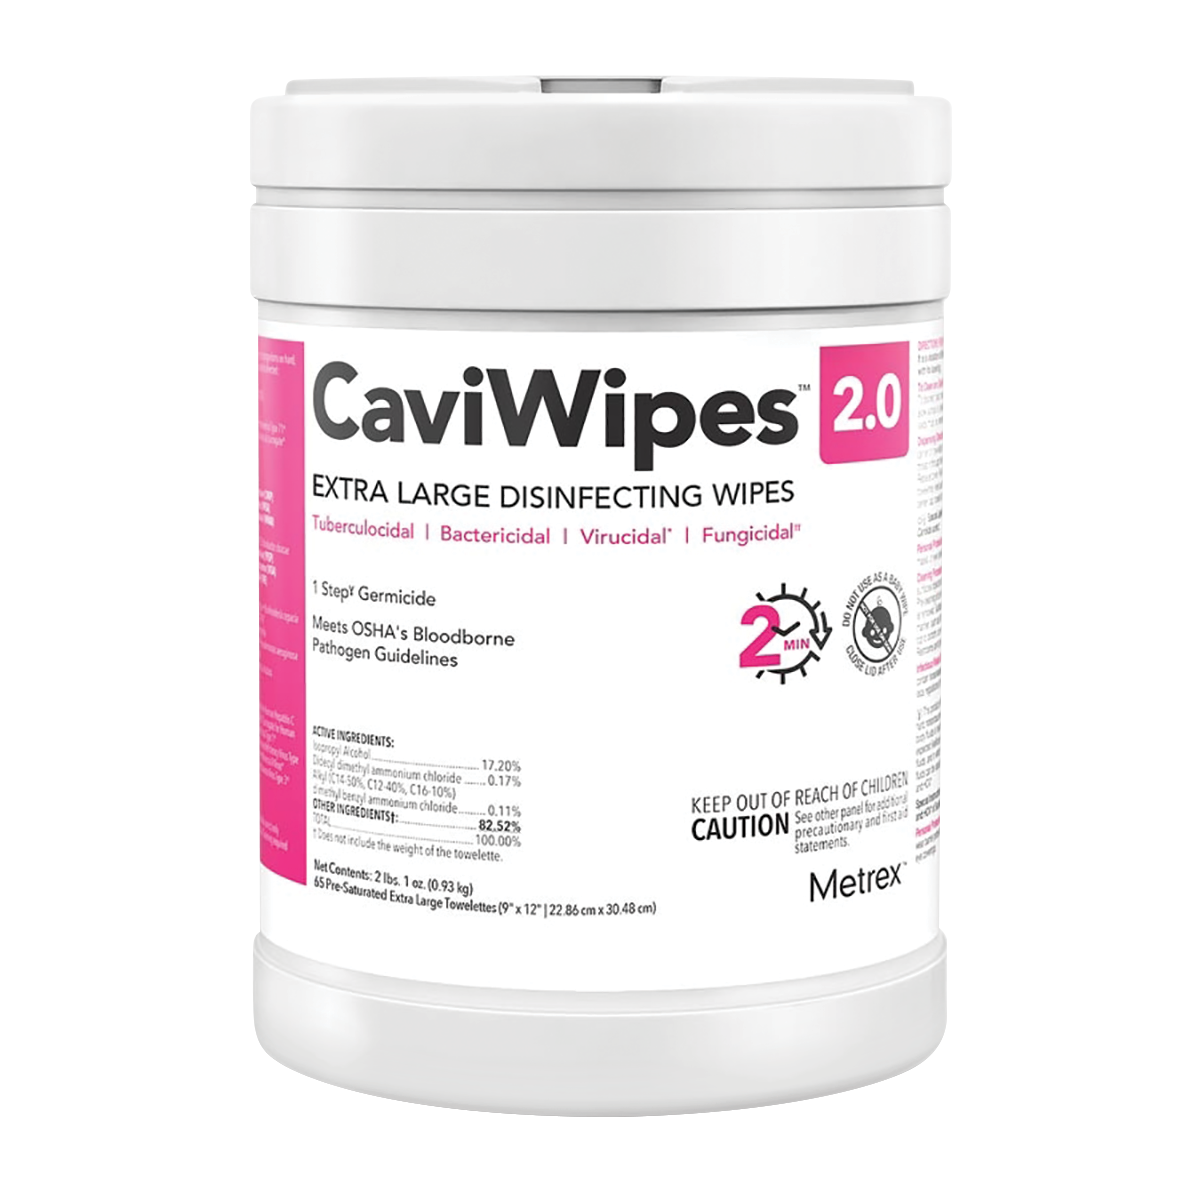 CaviWipes 2.0 XL Disinfectant Wipes